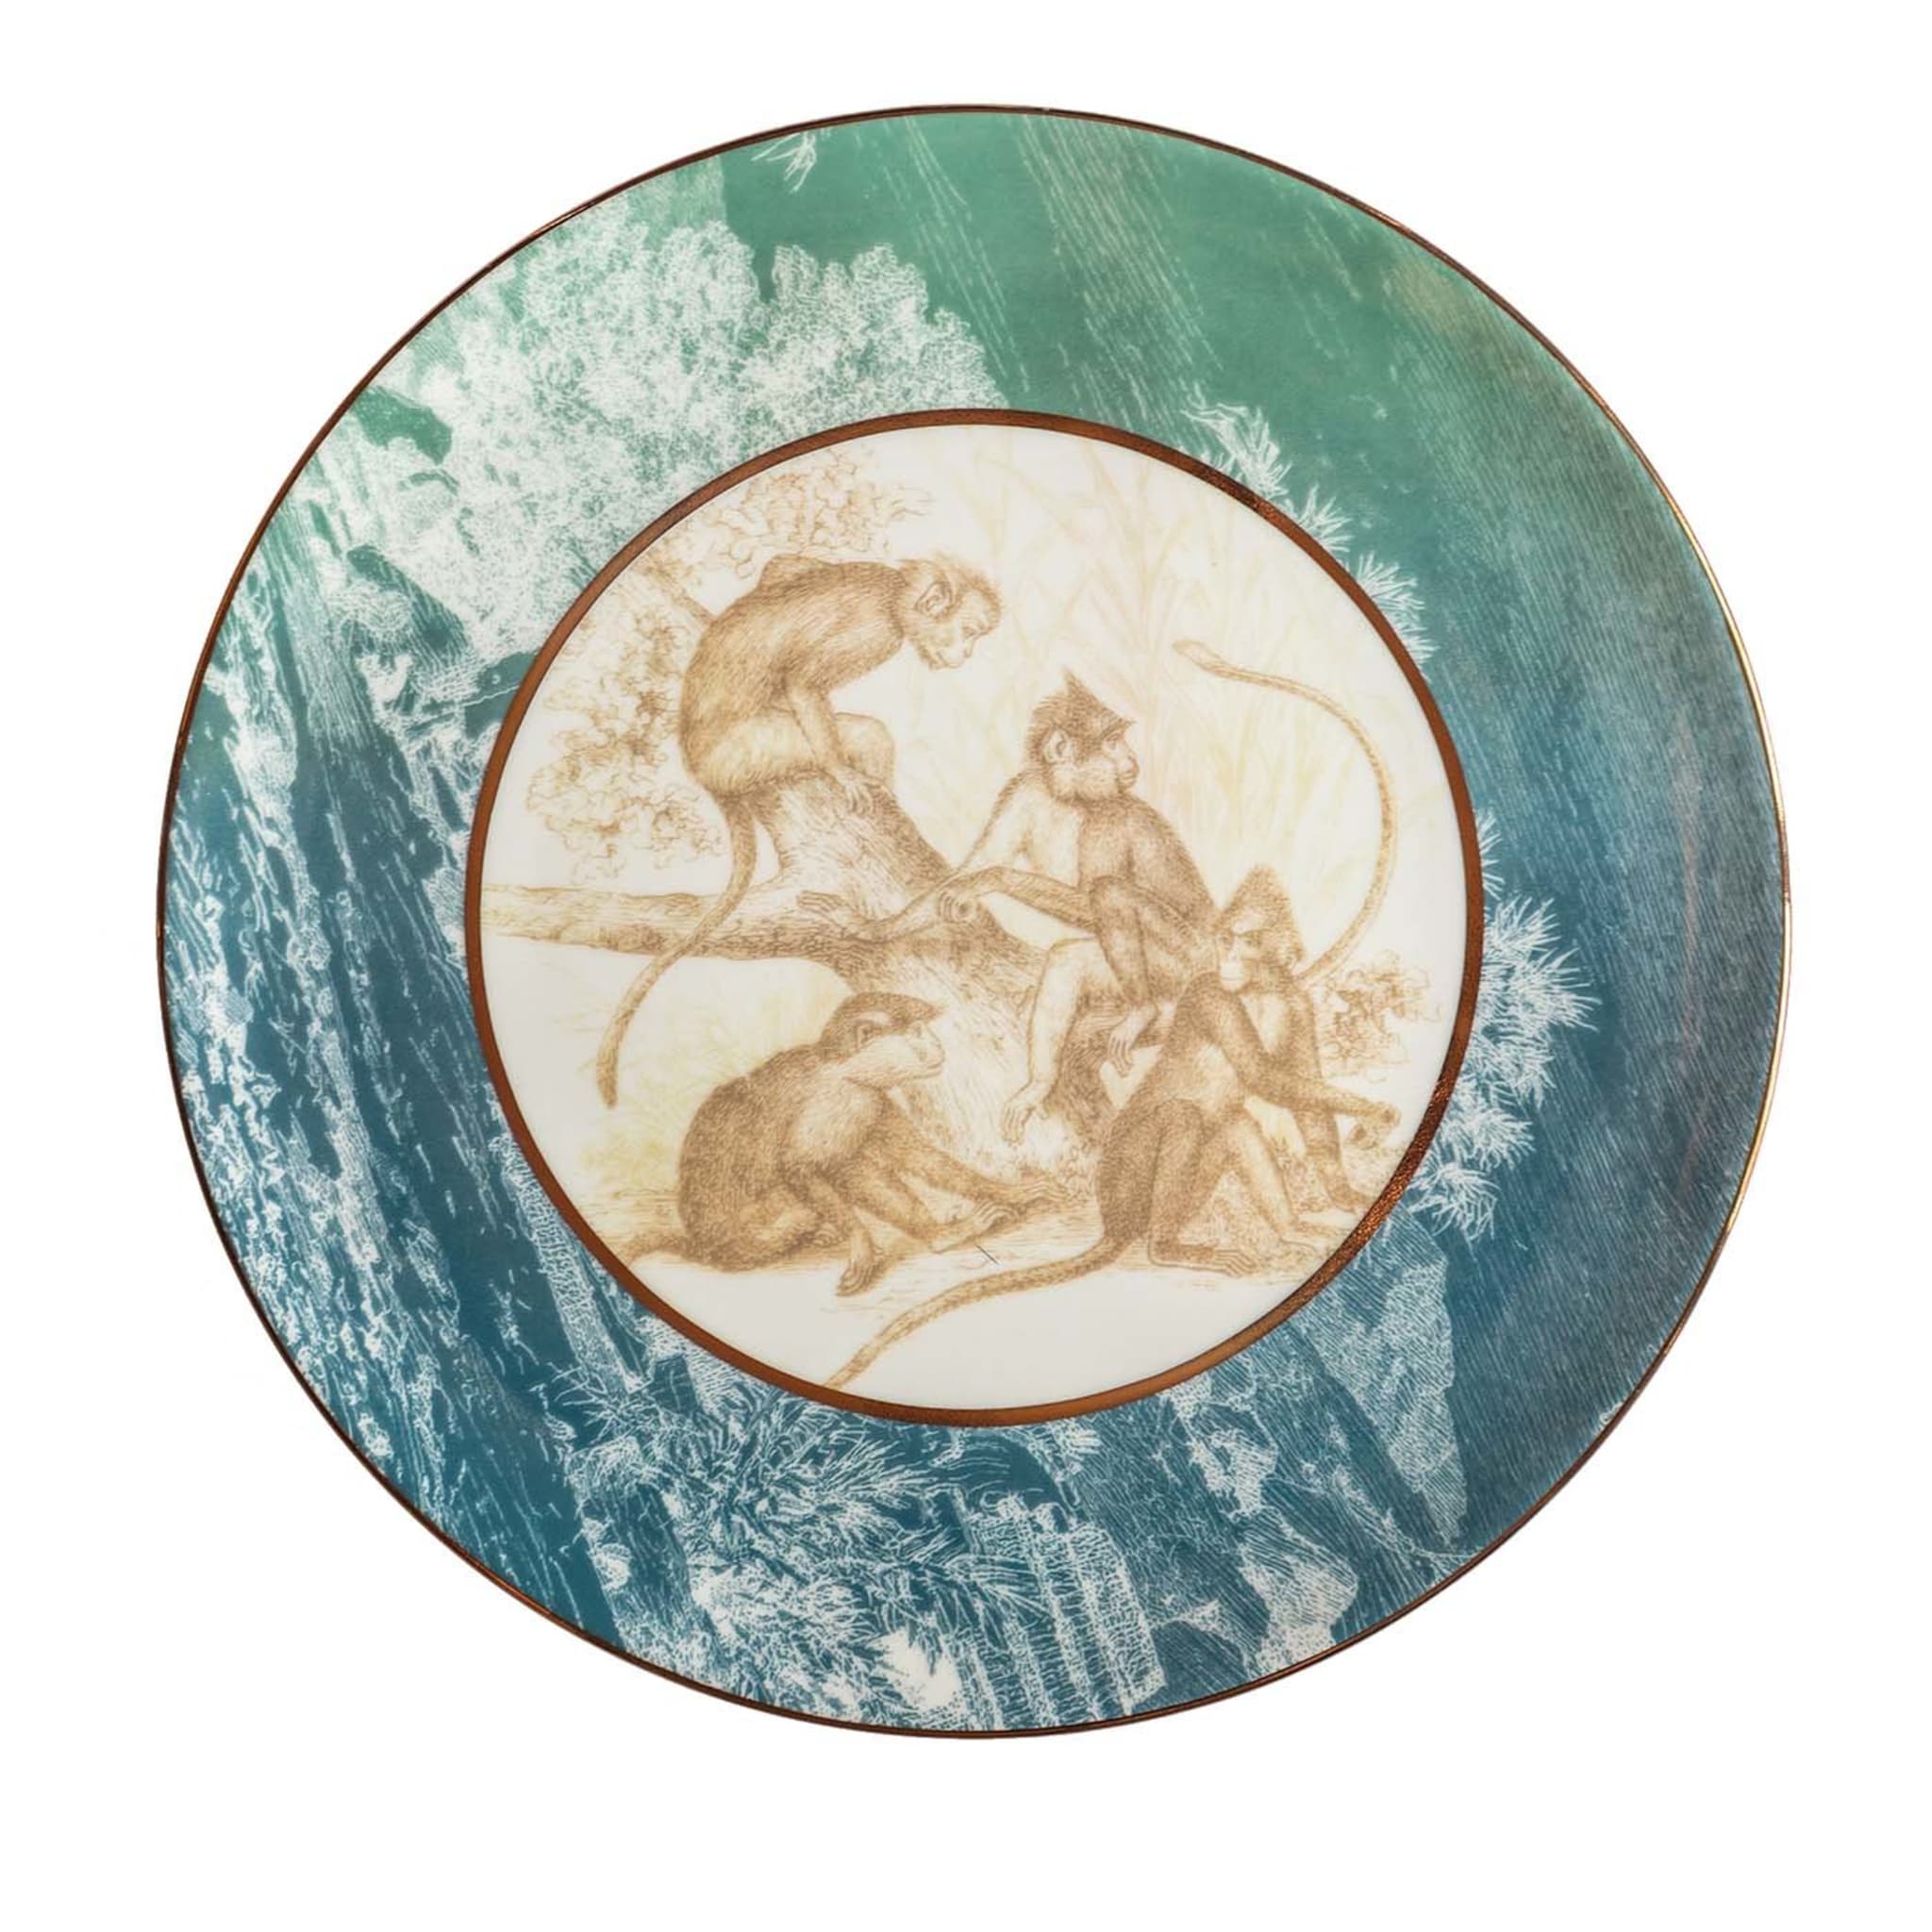 Galtaji Porcelain Dinner Plate With Landscape And Monkeys #6 - Main view